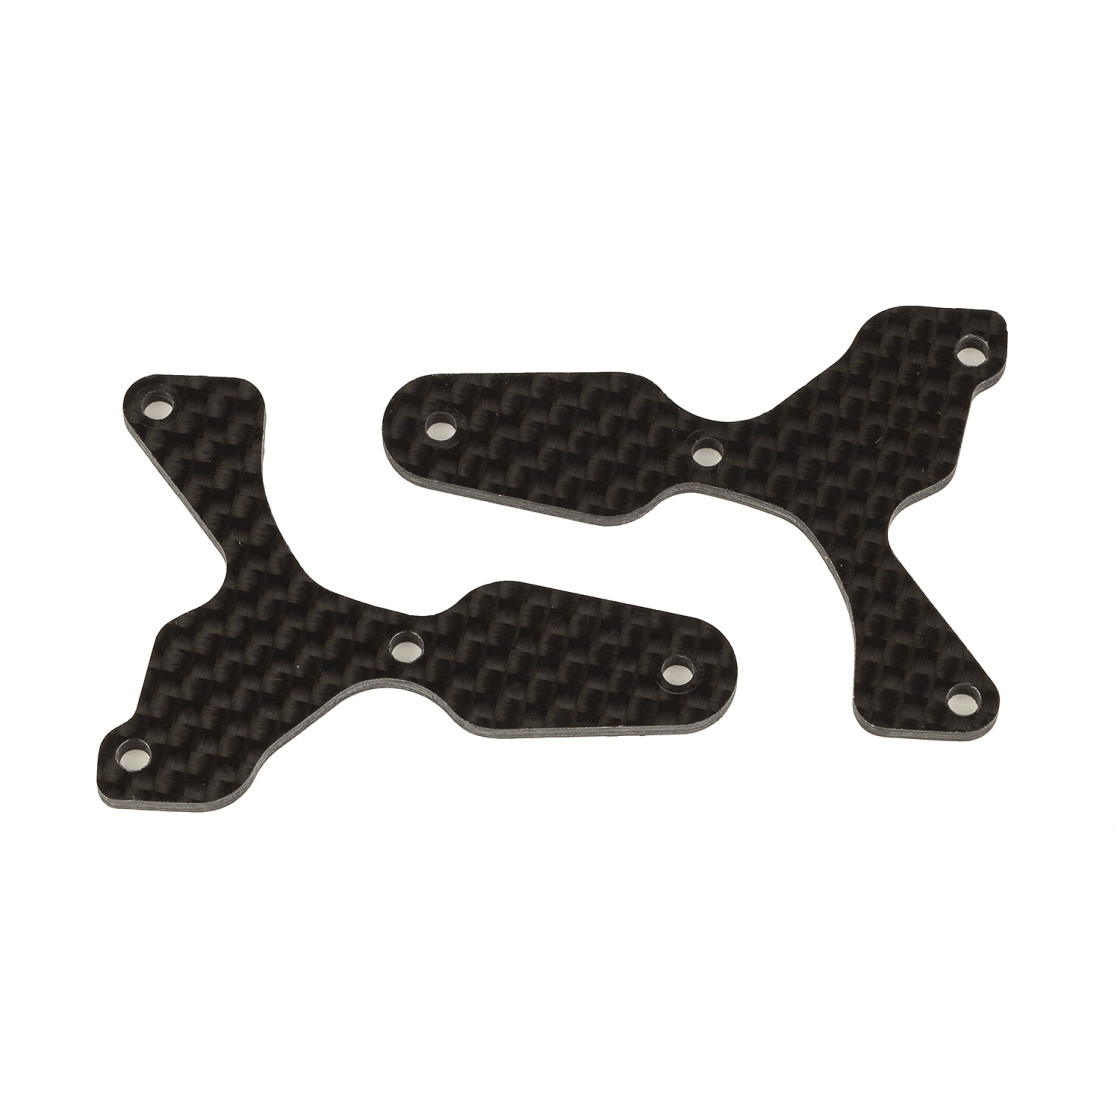 Team Associated RC8B4 FT front lower suspension arm inserts, carbon f ...